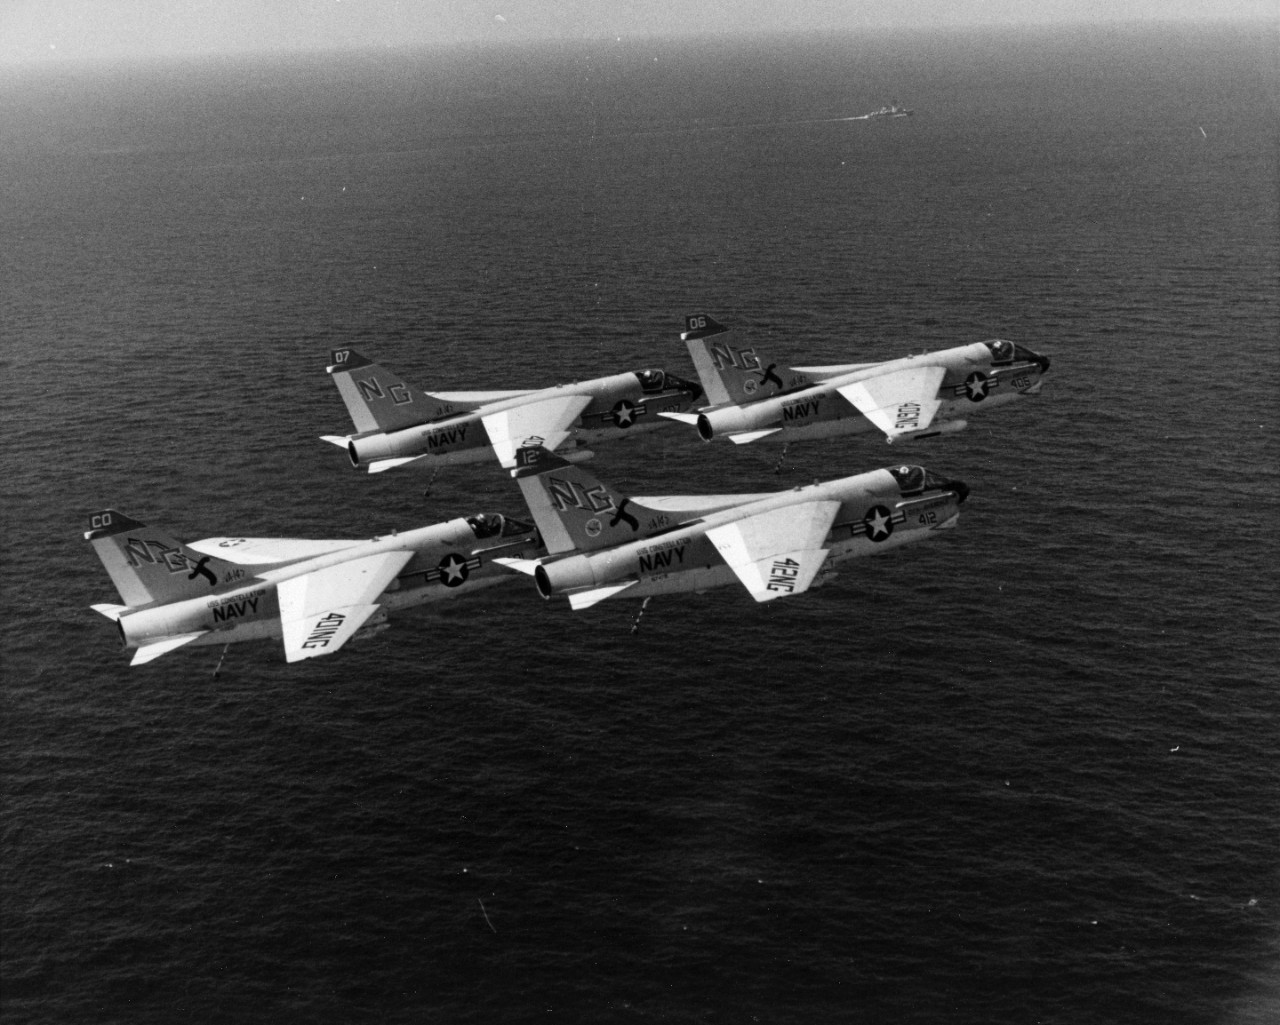 A-7E Corsair II attack aircraft from Attack Squadron 147 (VA-147) fly in formation over the Indian Ocean. They are assigned on board attack aircraft carrier USS Constellation (CVA-64) and are taking part in operation Midlink '74.